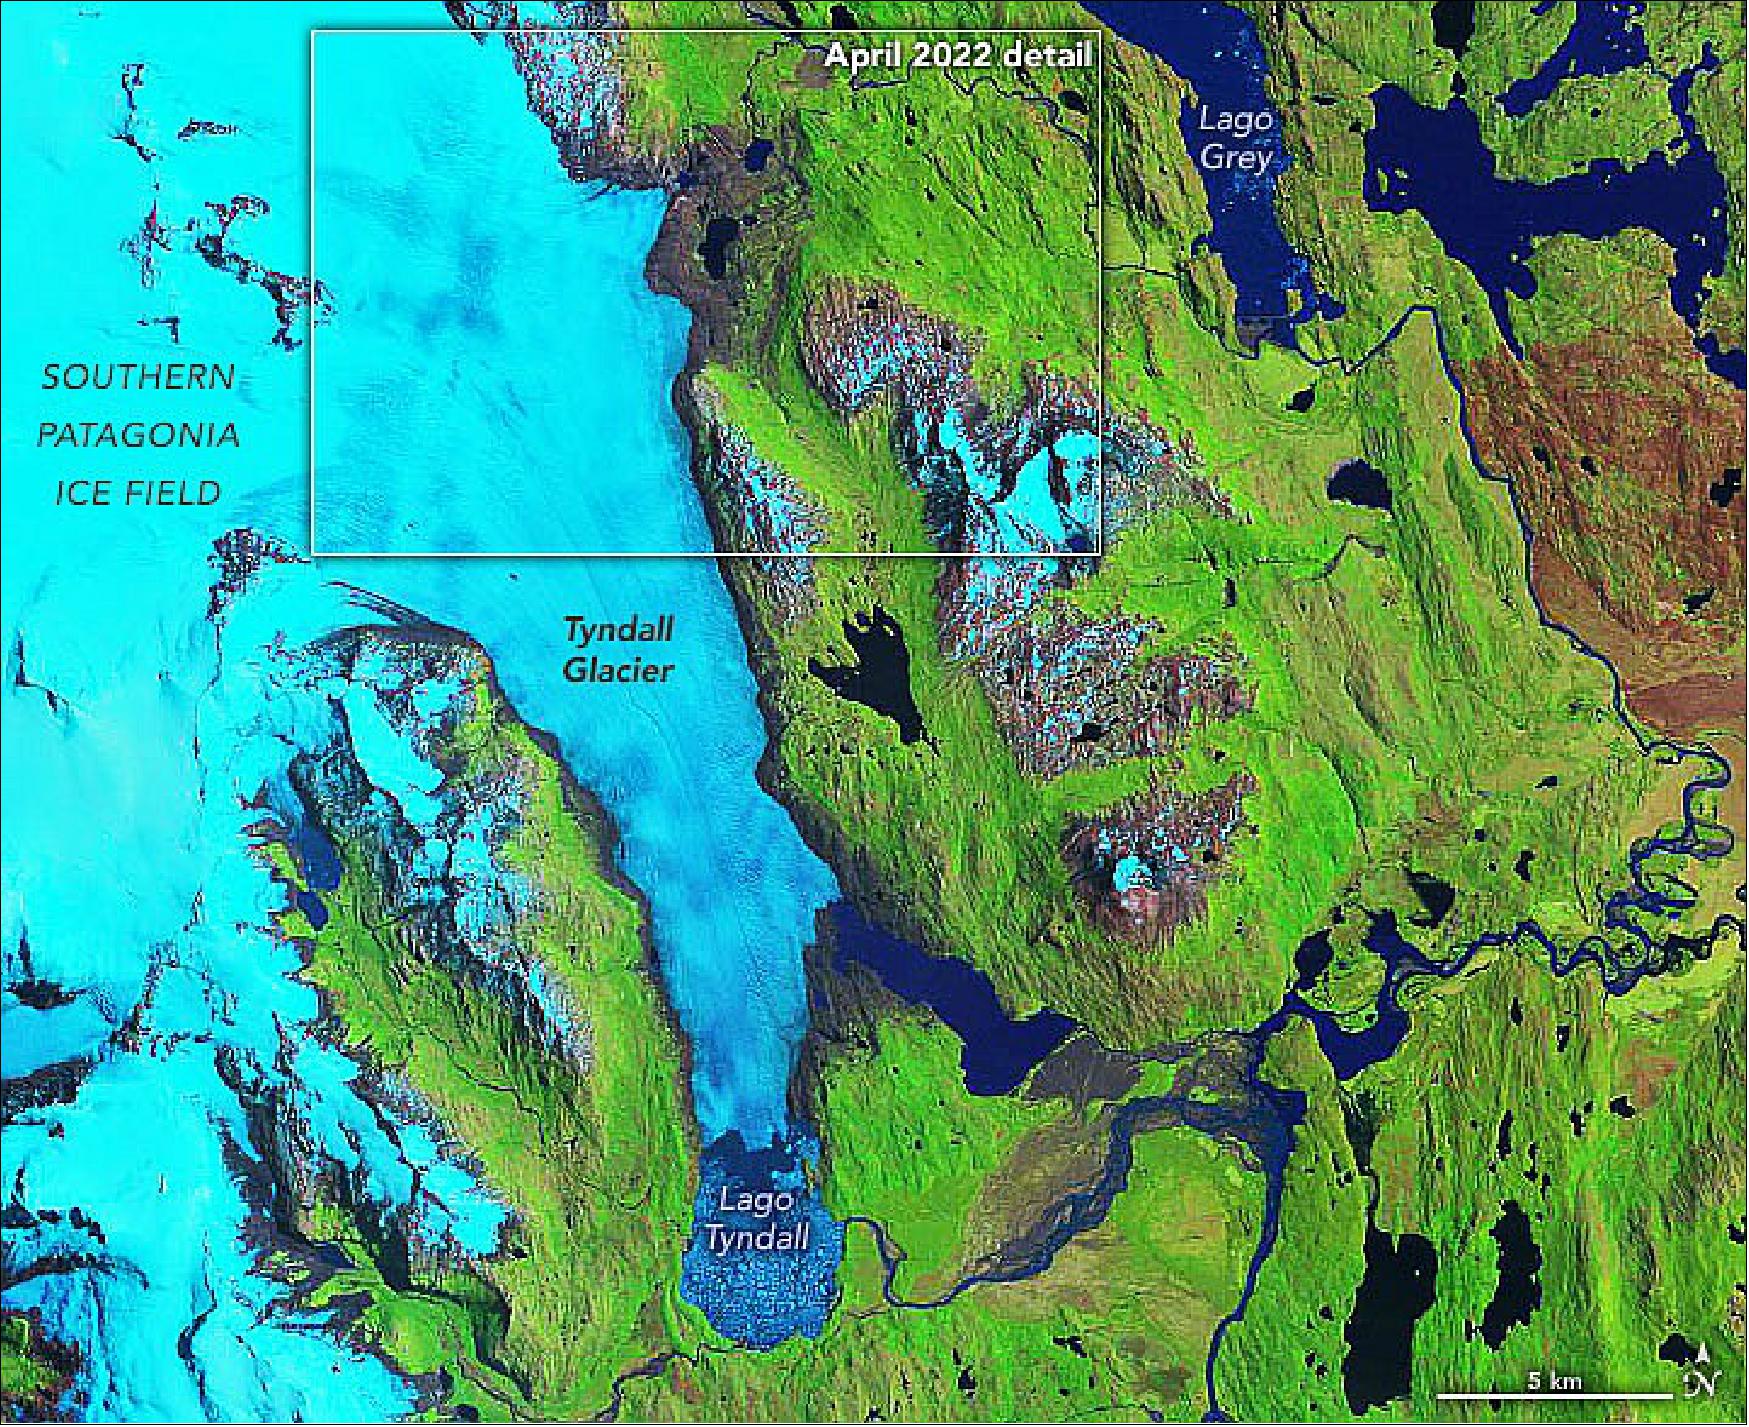 Figure 37: This image of Patagonia's Tyndall Glacier was observed on 14 January 1986 with TM on the Landsat-5 satellite (image credit: NASA Earth Observatory)